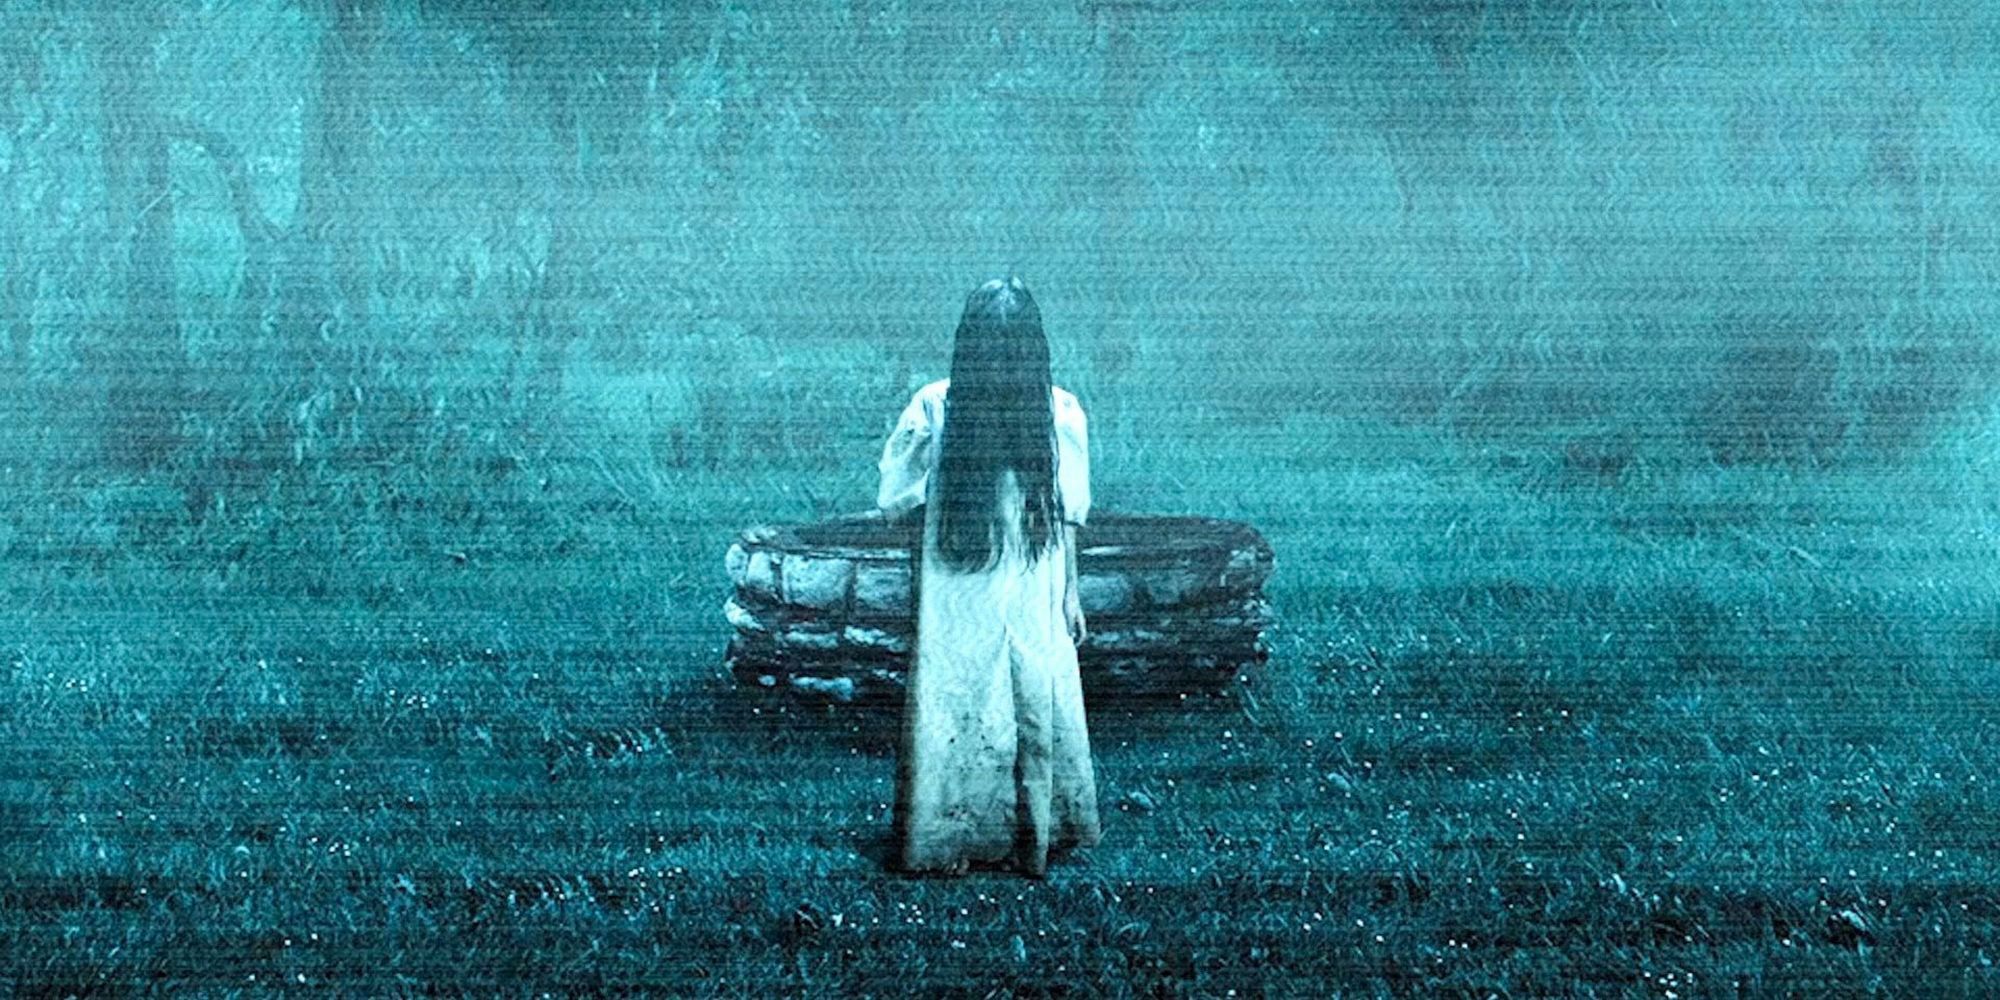 still from the videotape of Samara from the Ring